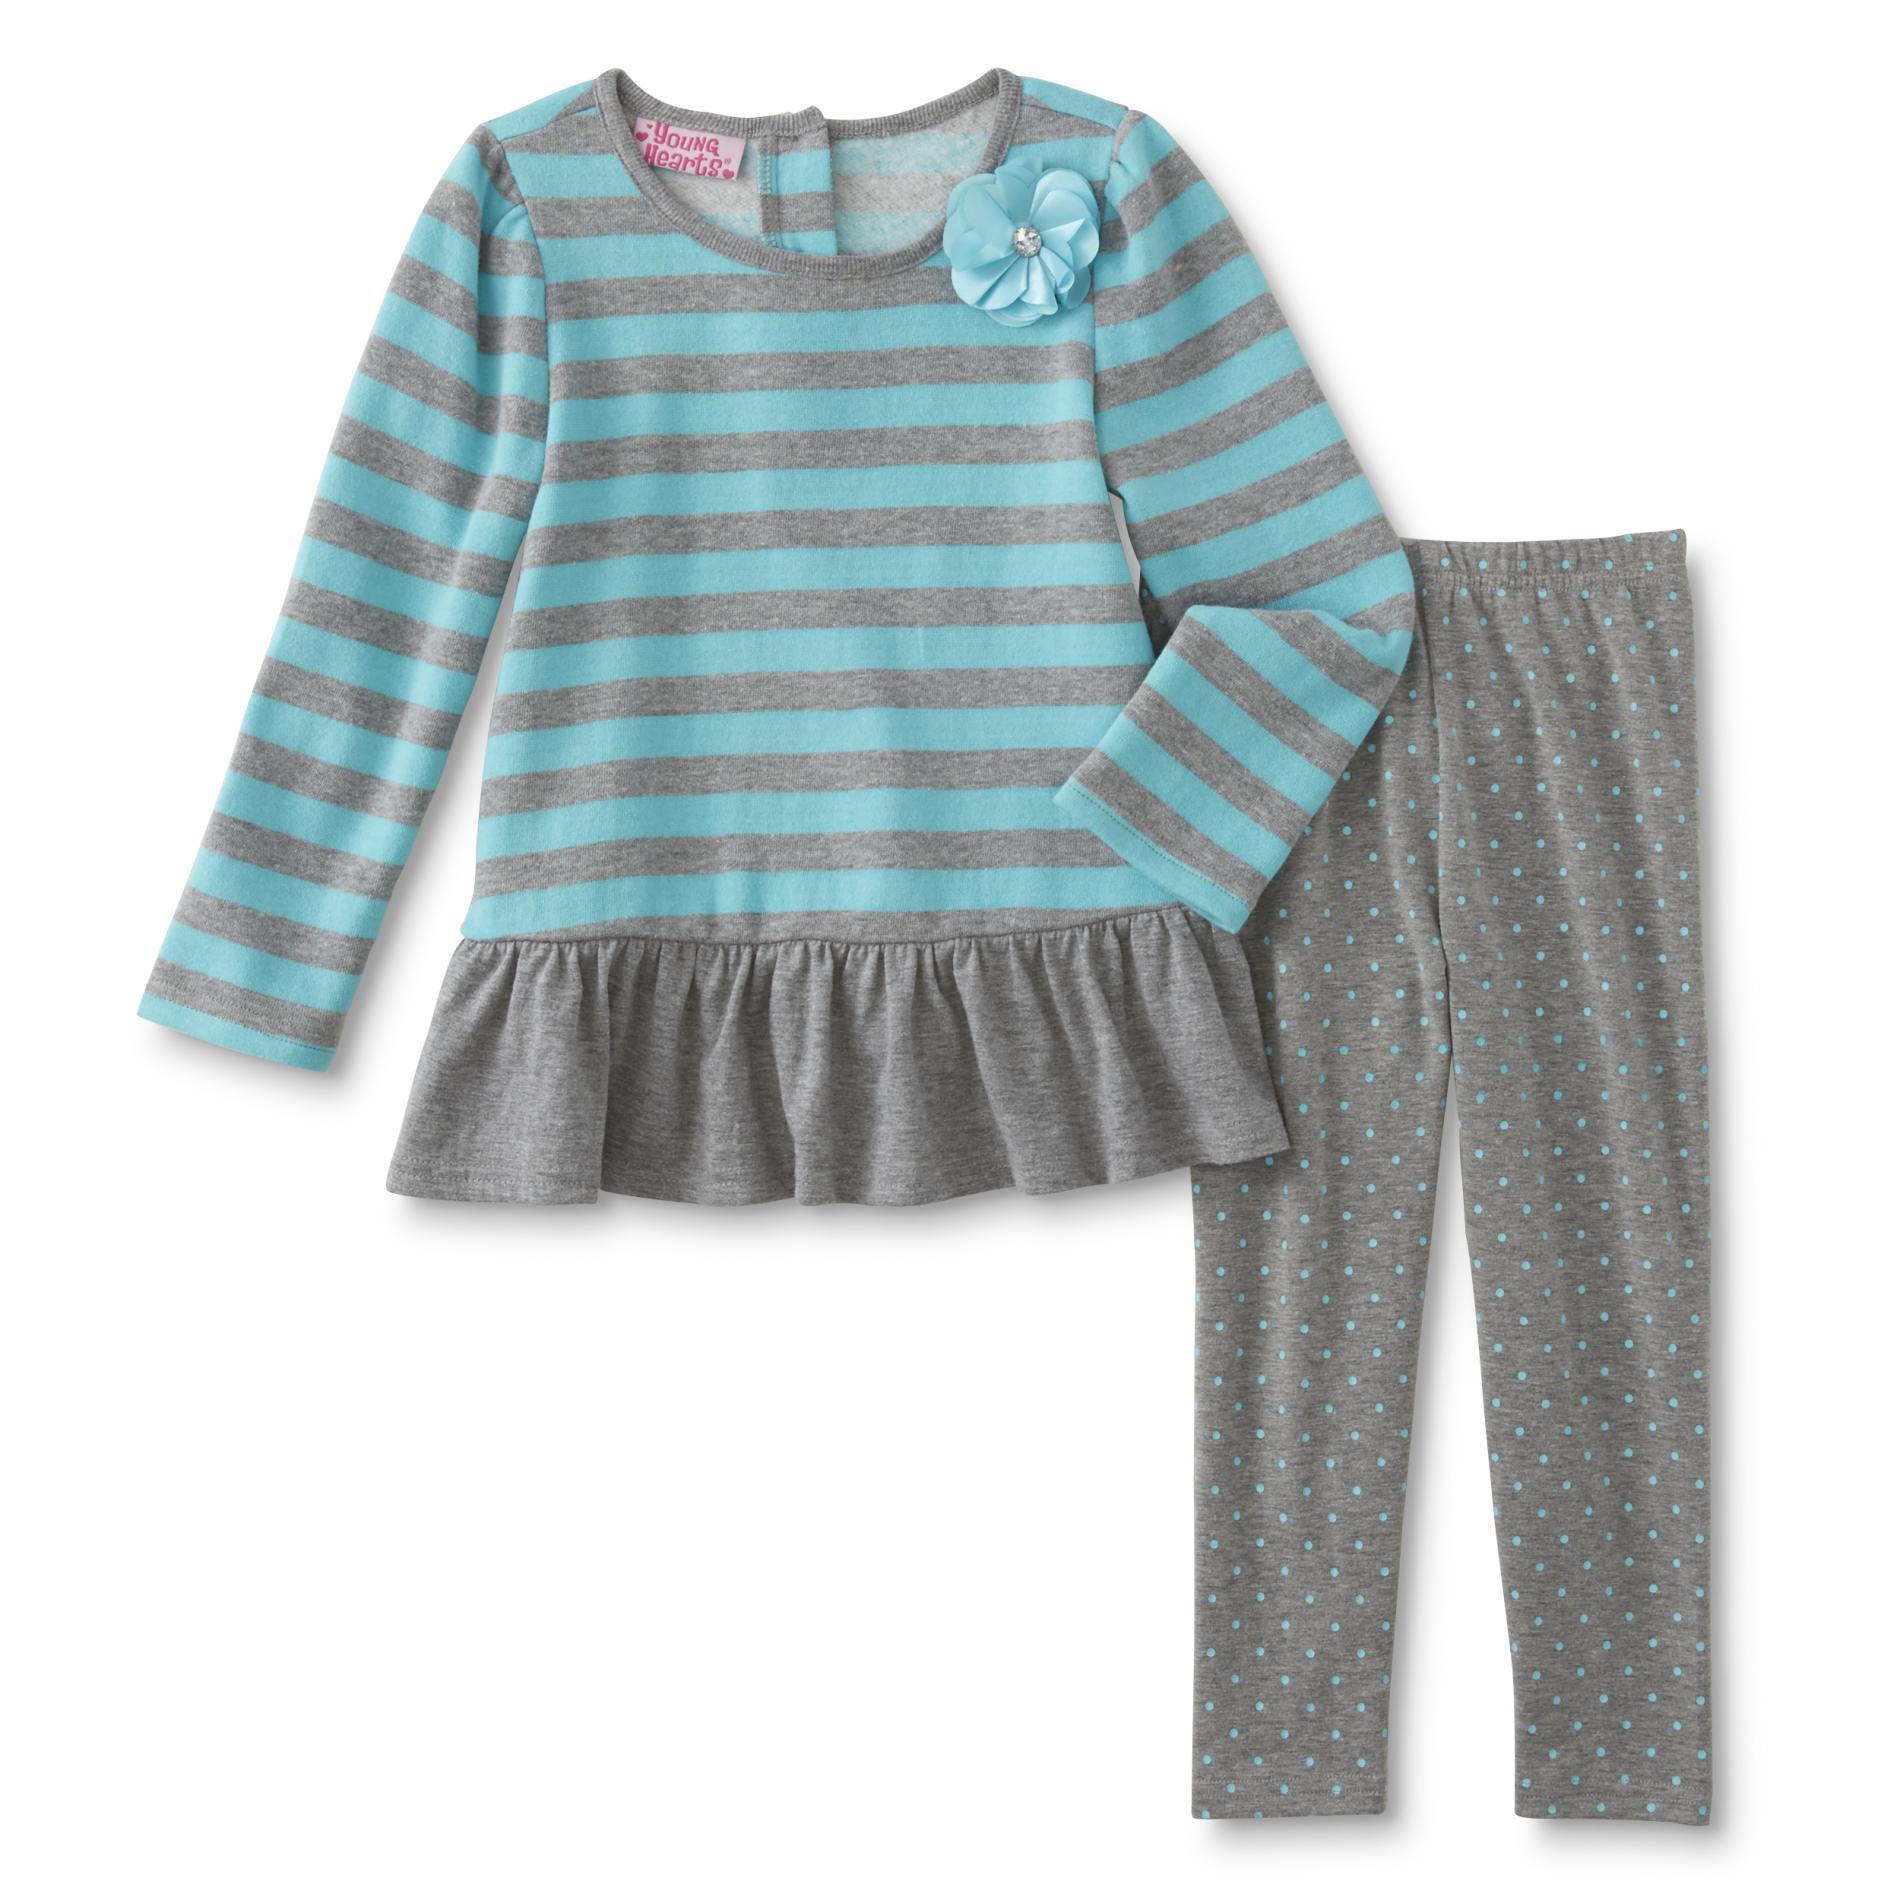 Young Hearts Infant & Toddler Girl's Tunic & Leggings - Striped